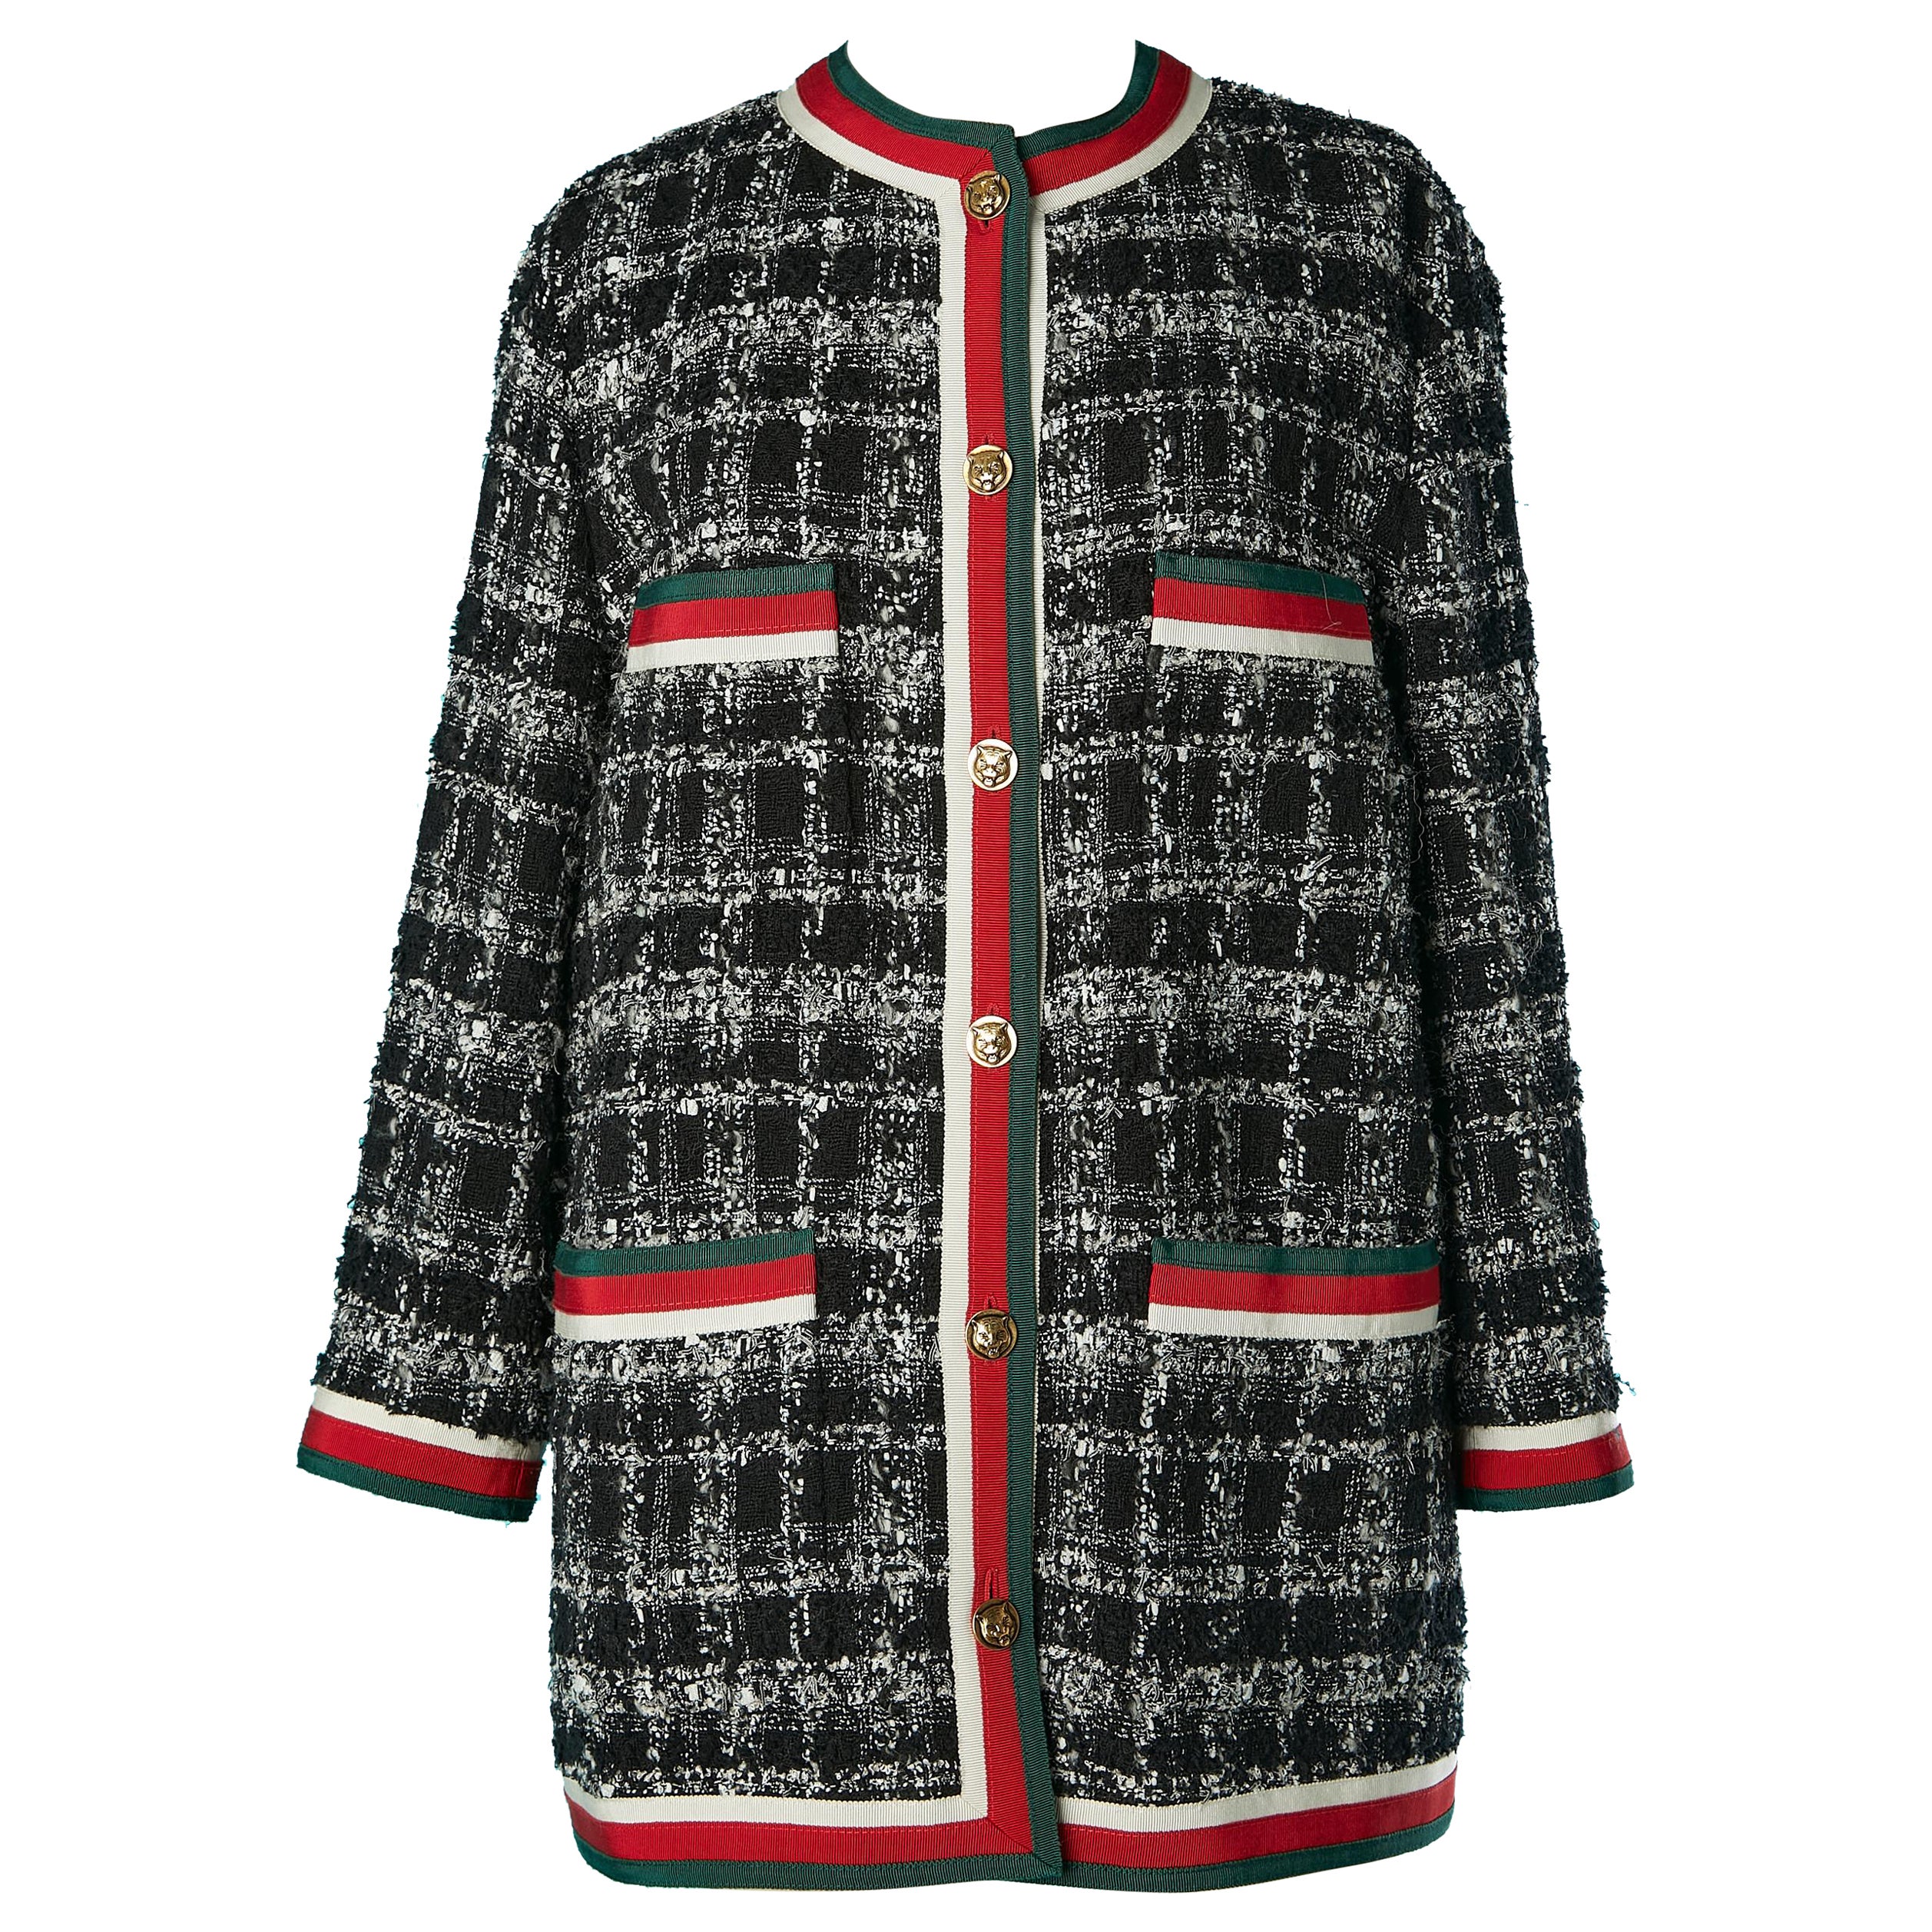 Tweed jacket with white, red & green trimming Gucci by Alessandro Michele 2019 For Sale